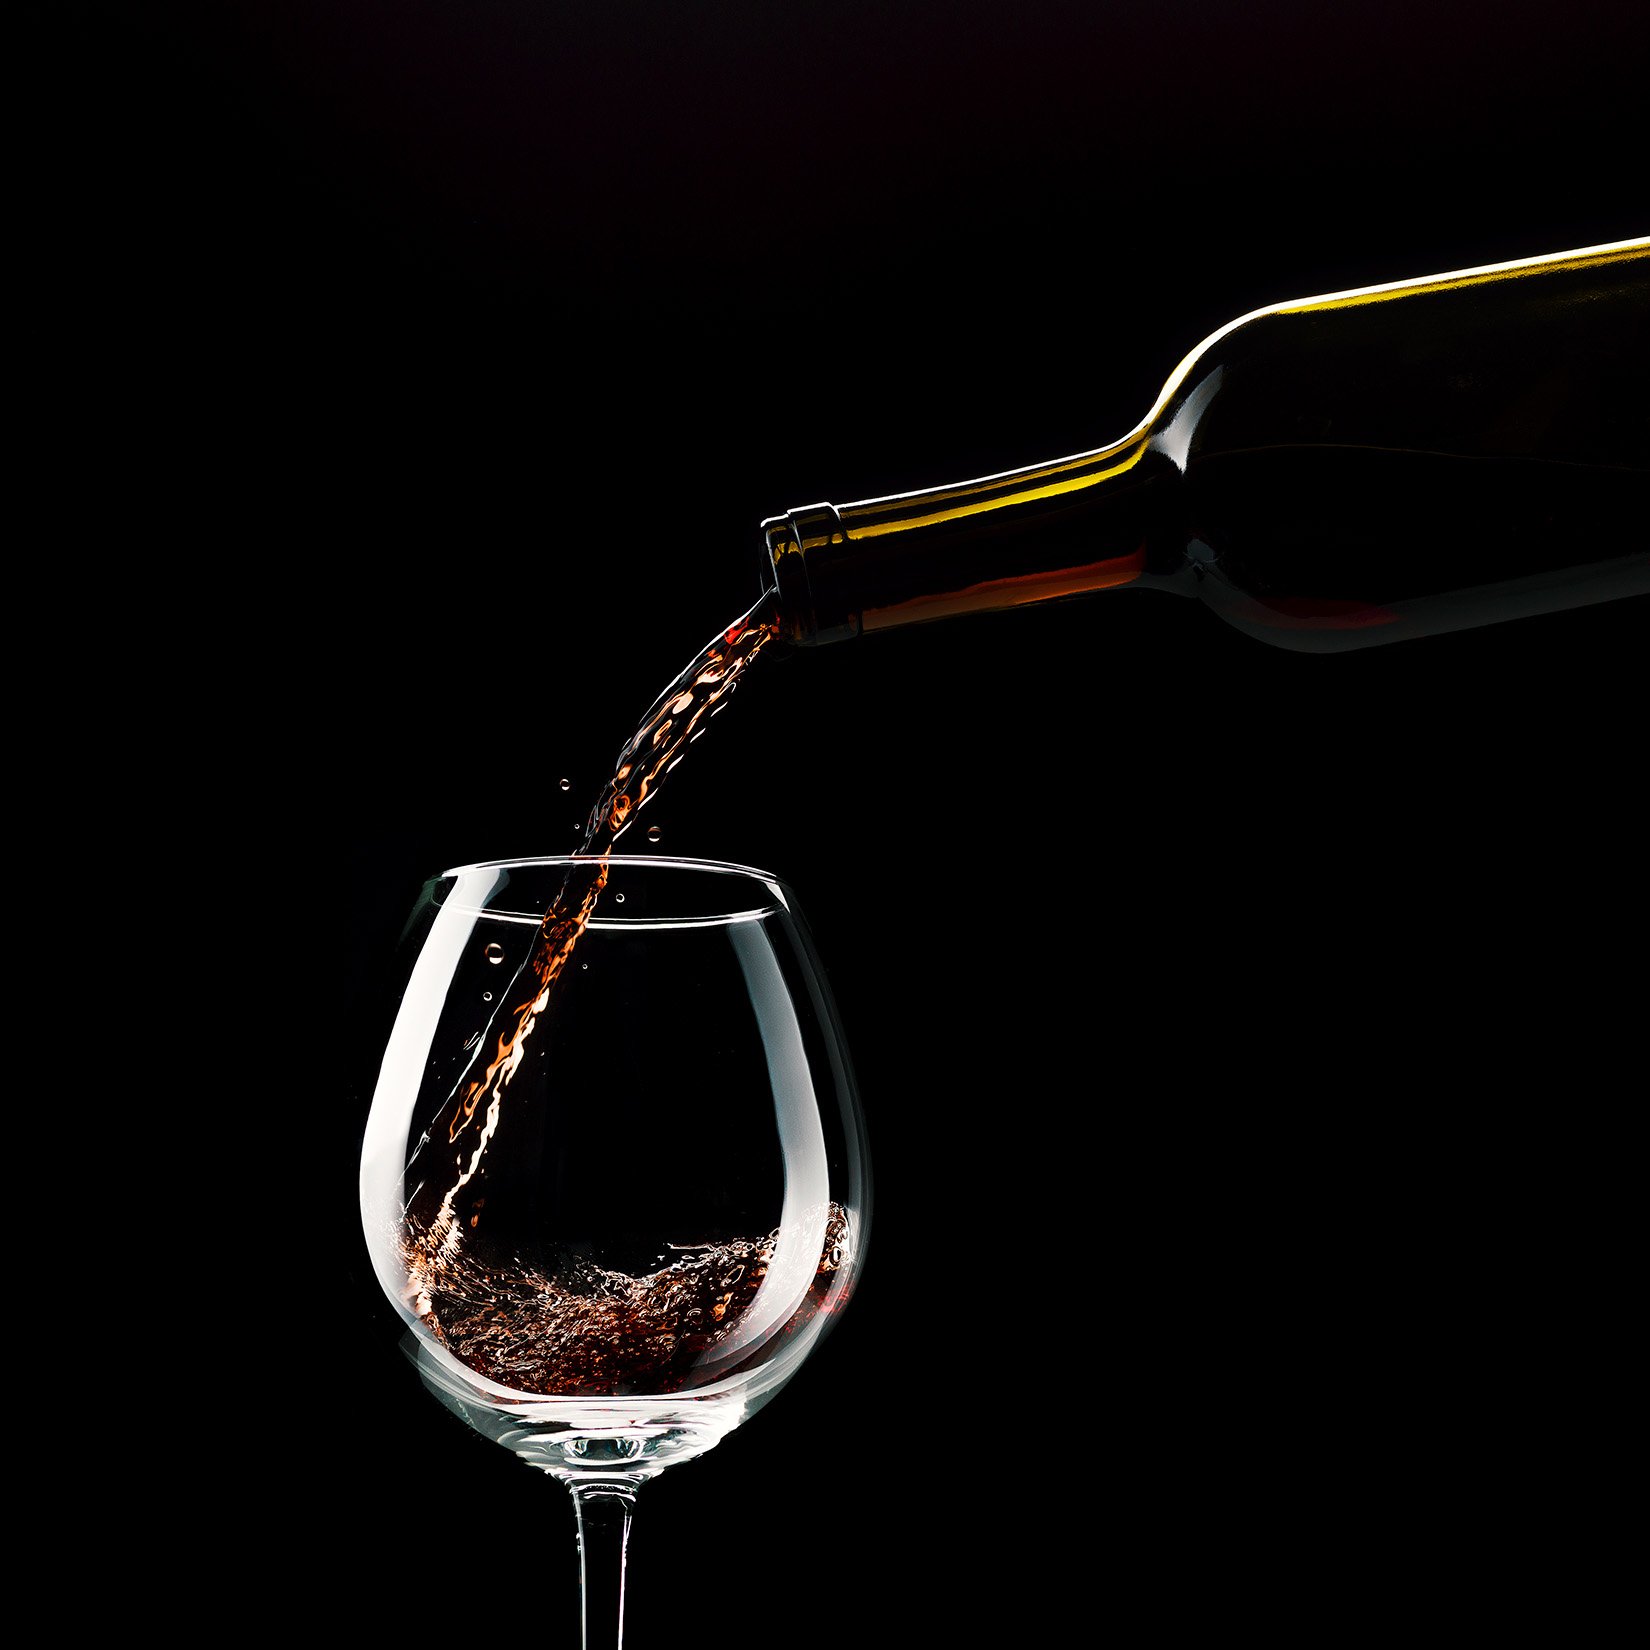 pouring-red-wine-in-a-wineglass-2021-08-27-09-36-37-utc_web.jpg